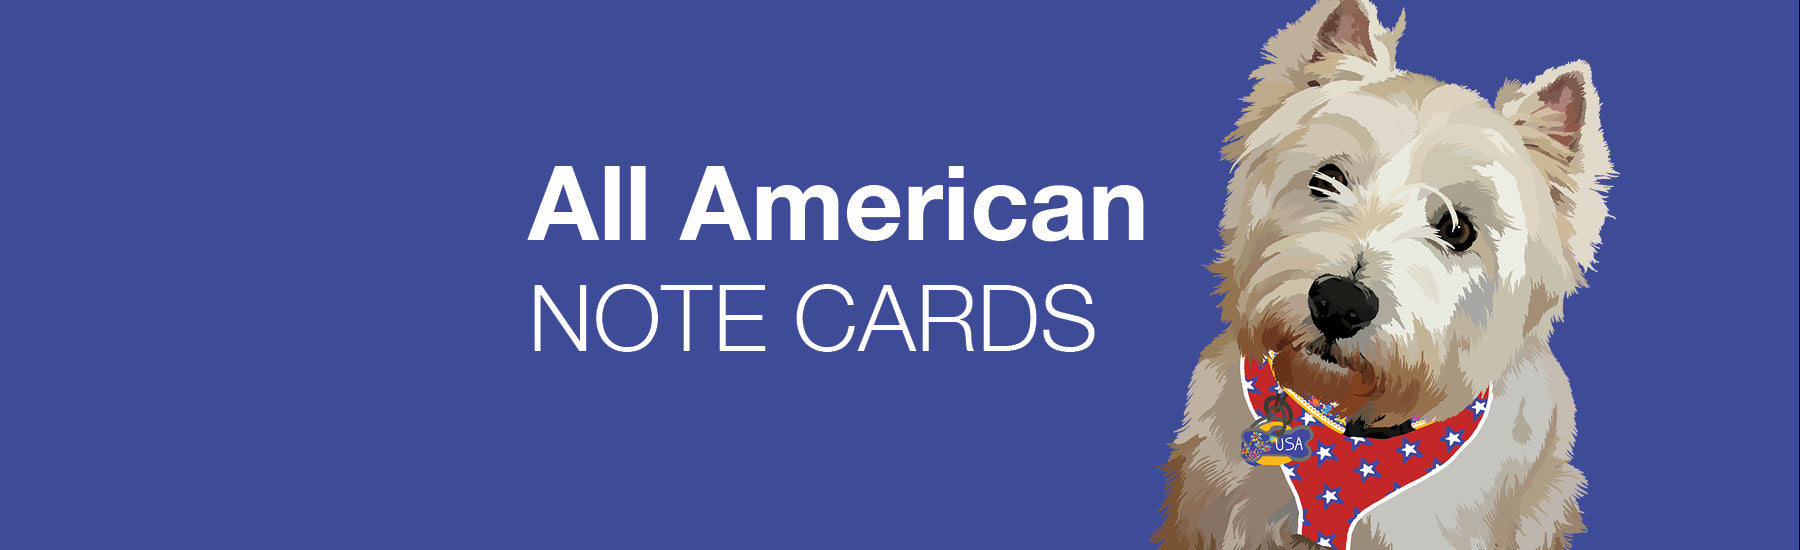 ALL AMERICAN NOTE CARDS